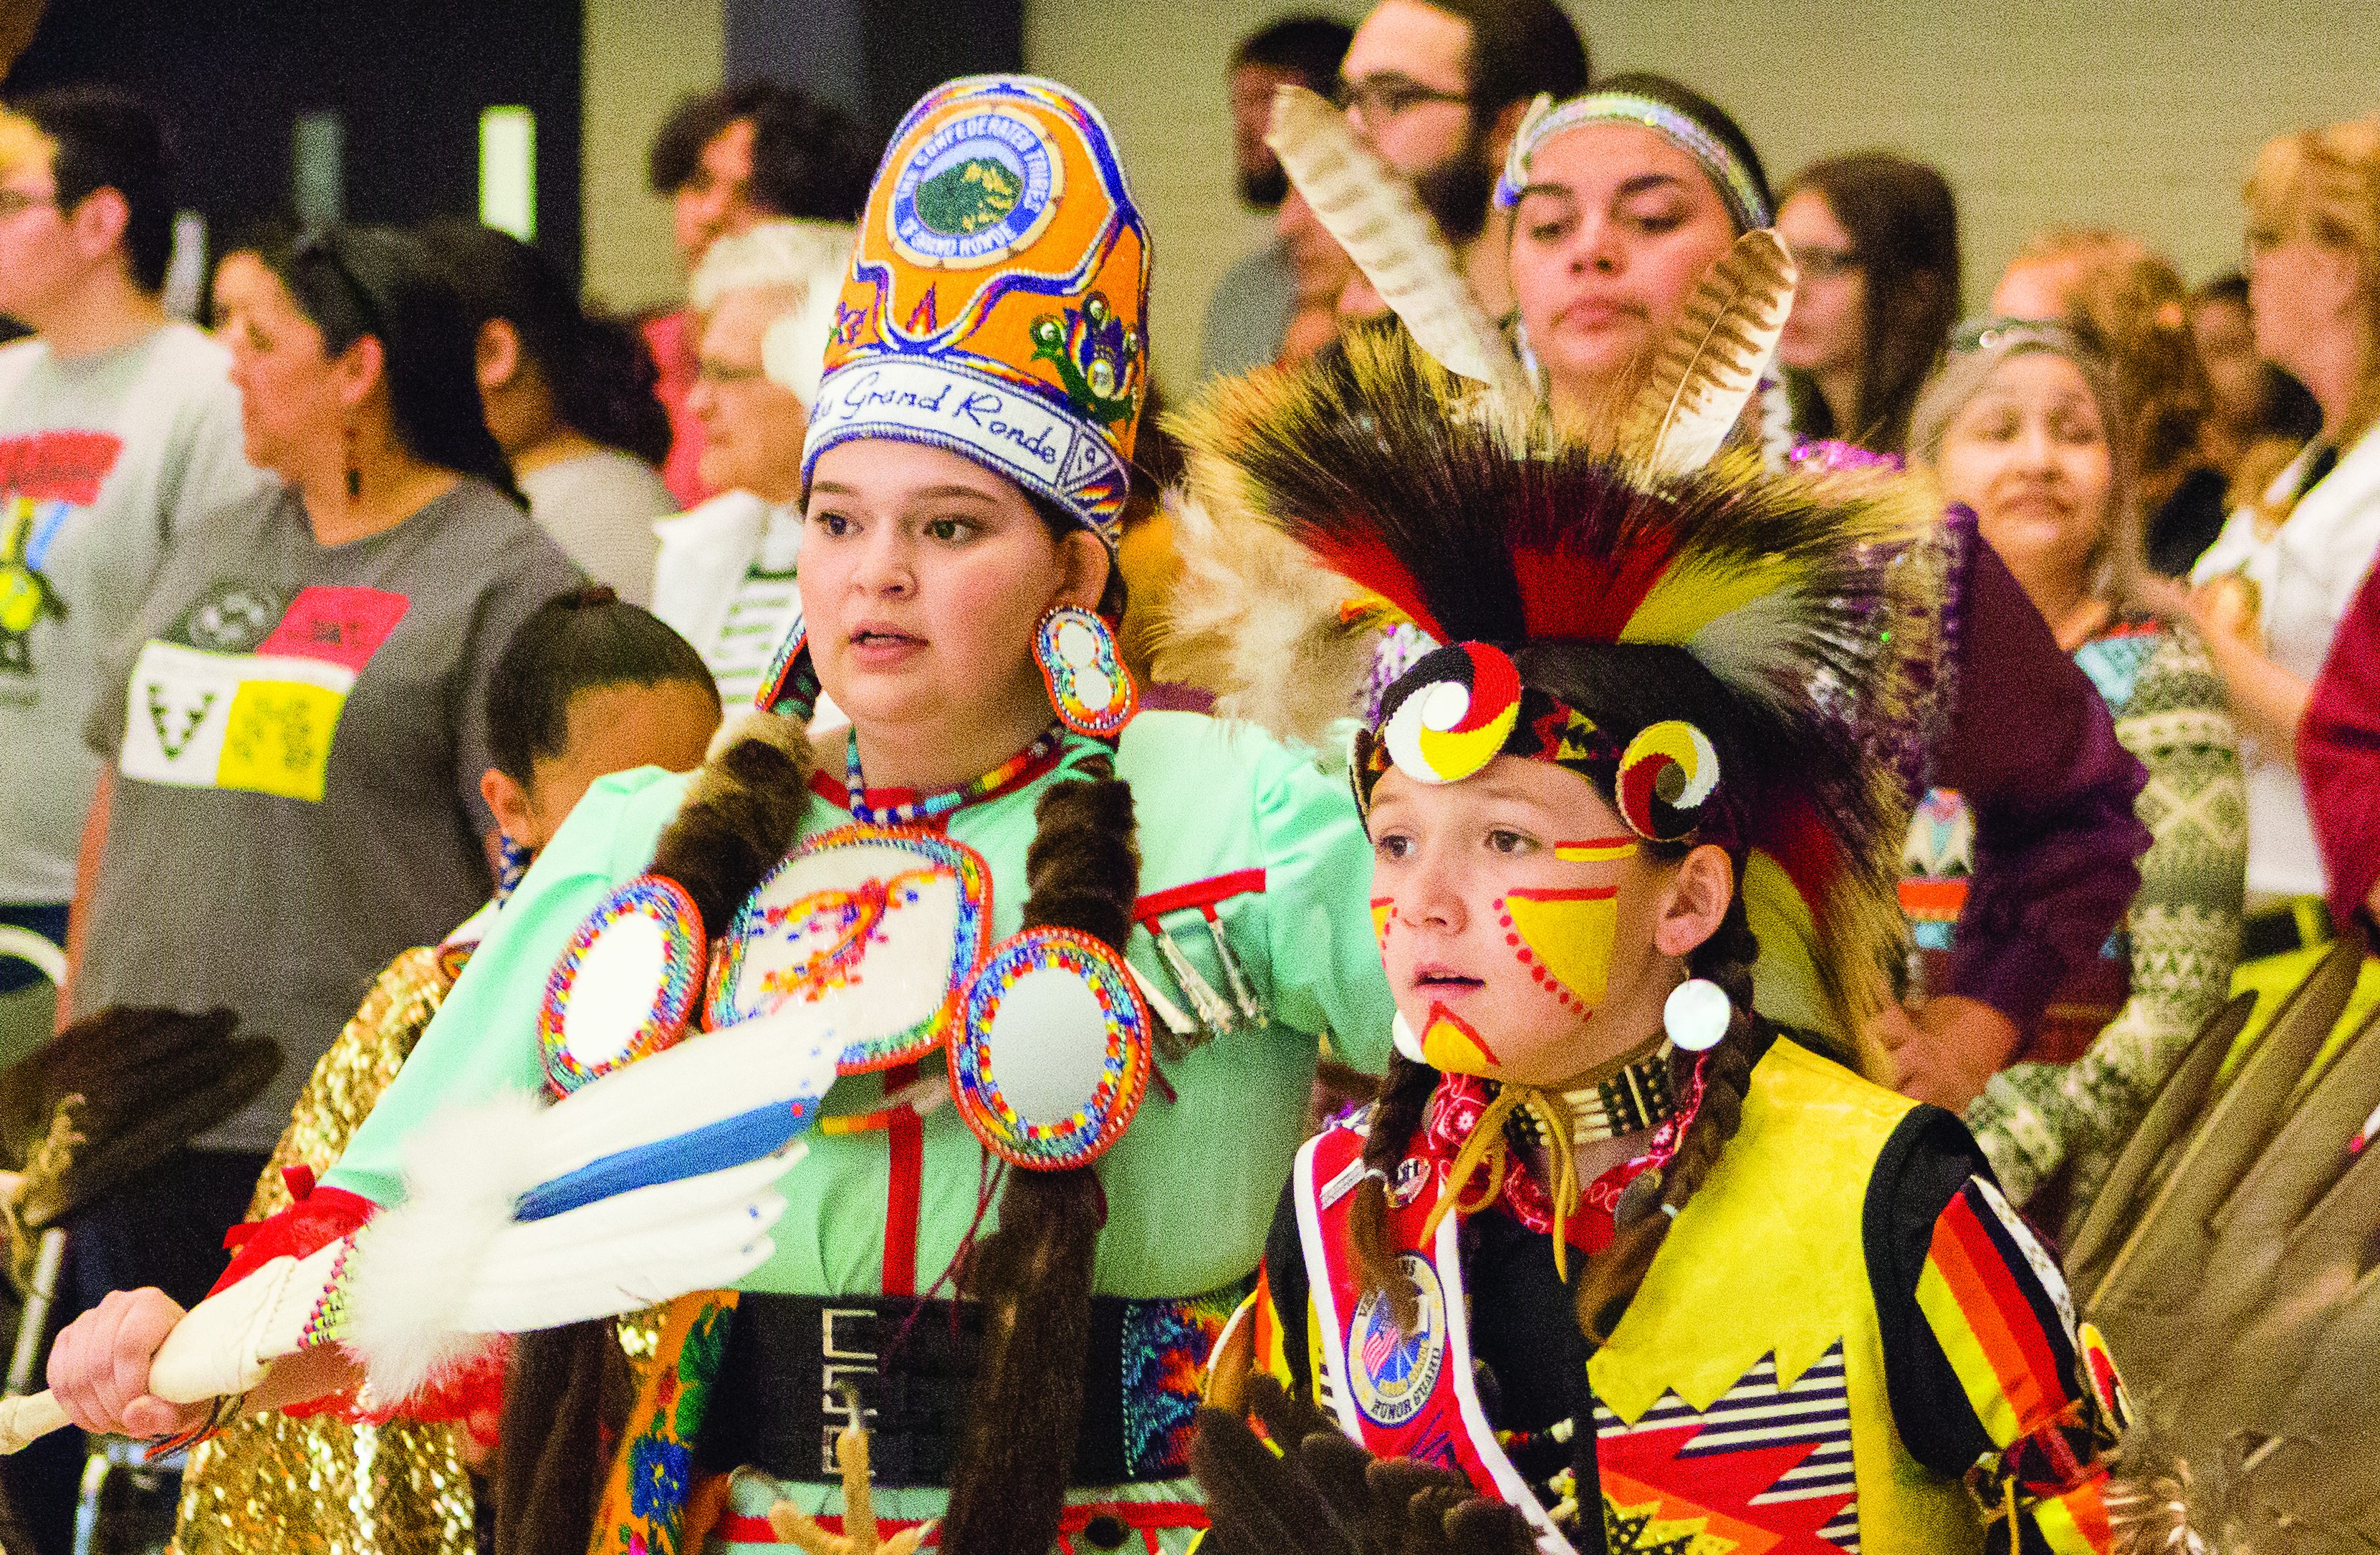 The 26th Annual Pow Wow is celebrated at Western